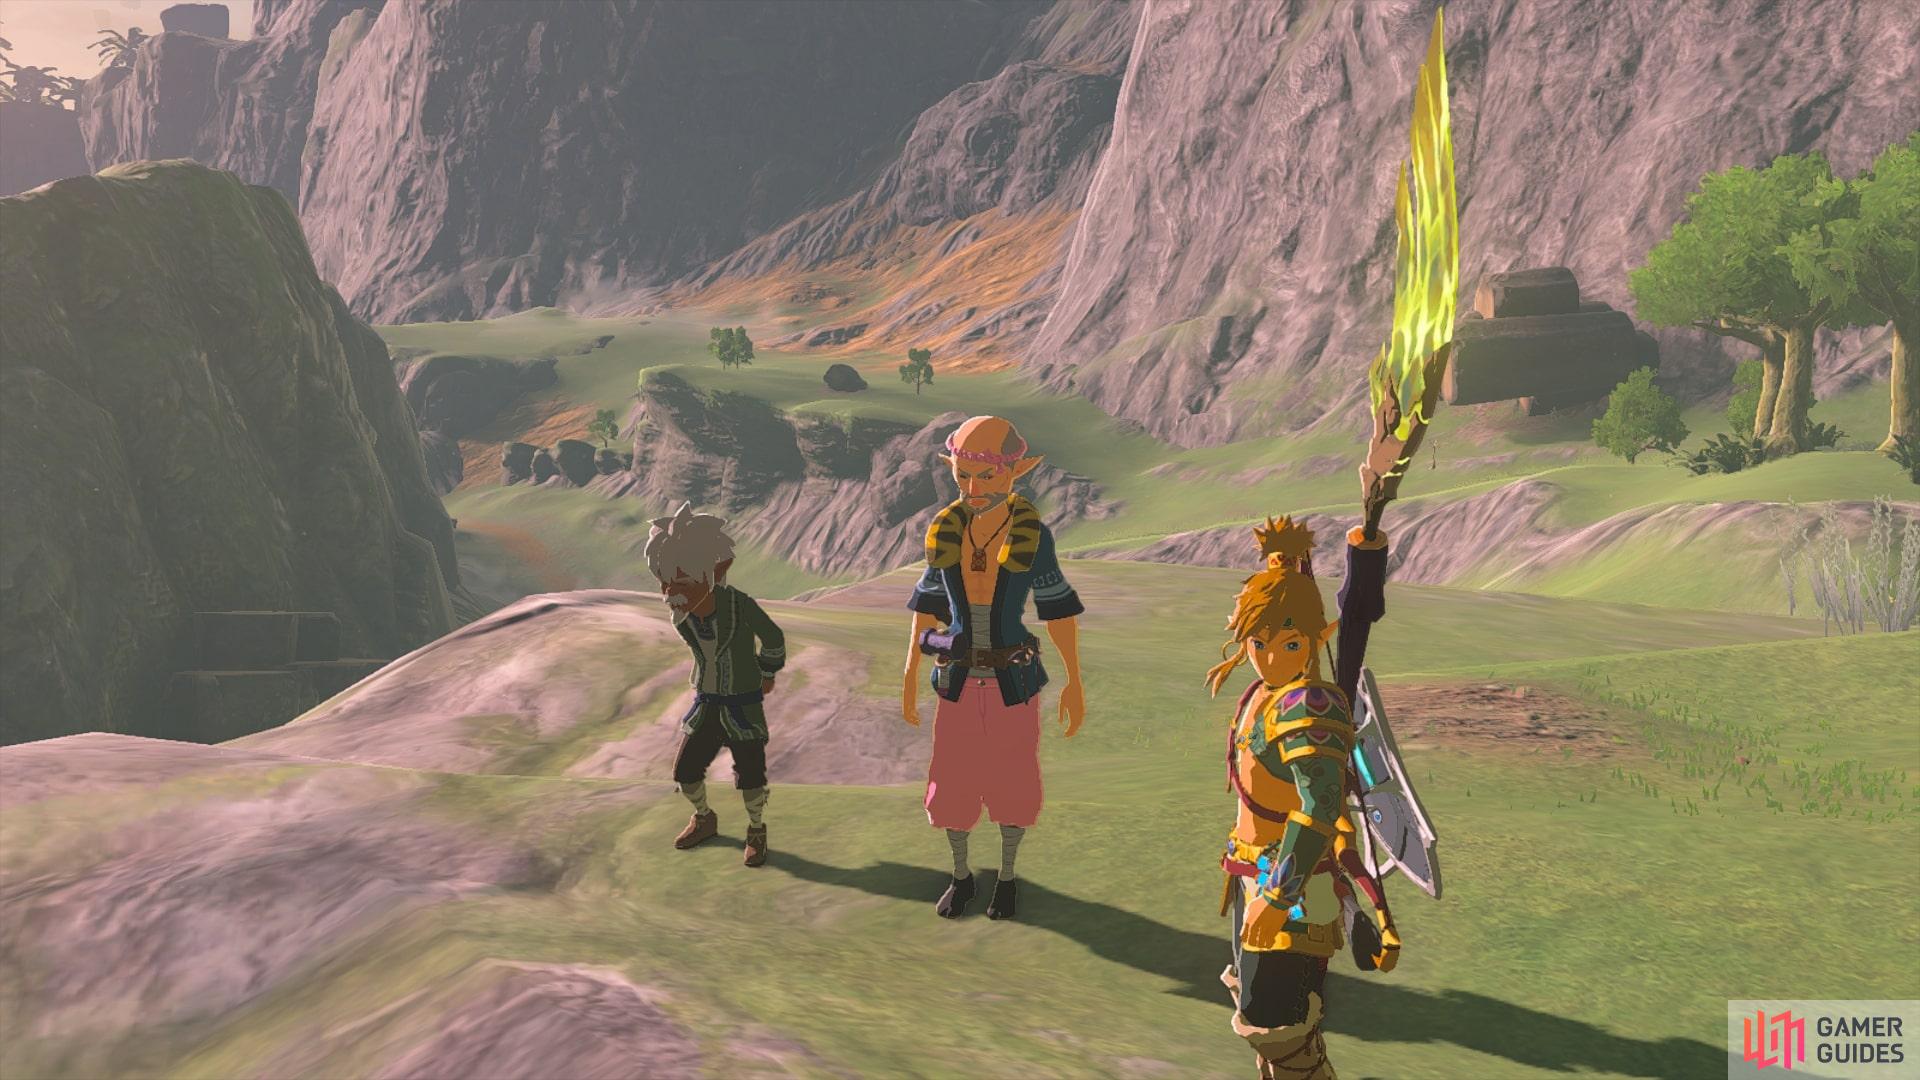 Rozel and Bolson telling Link about Lurelin Village.